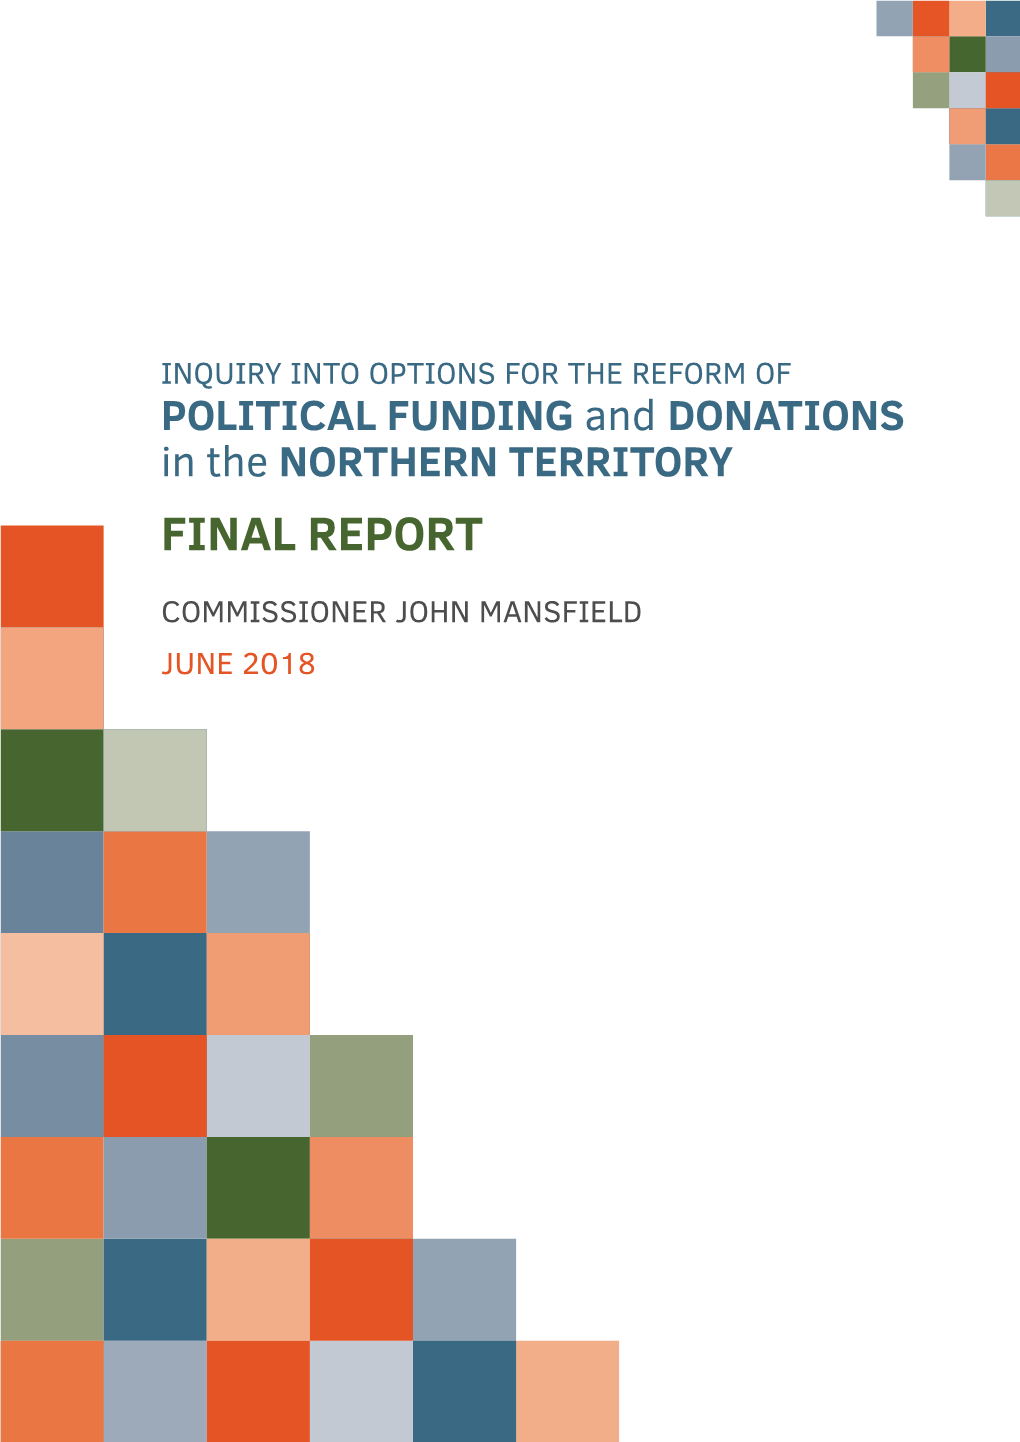 2018 Inquiry Into Options for the Reform of Political Funding and Donations